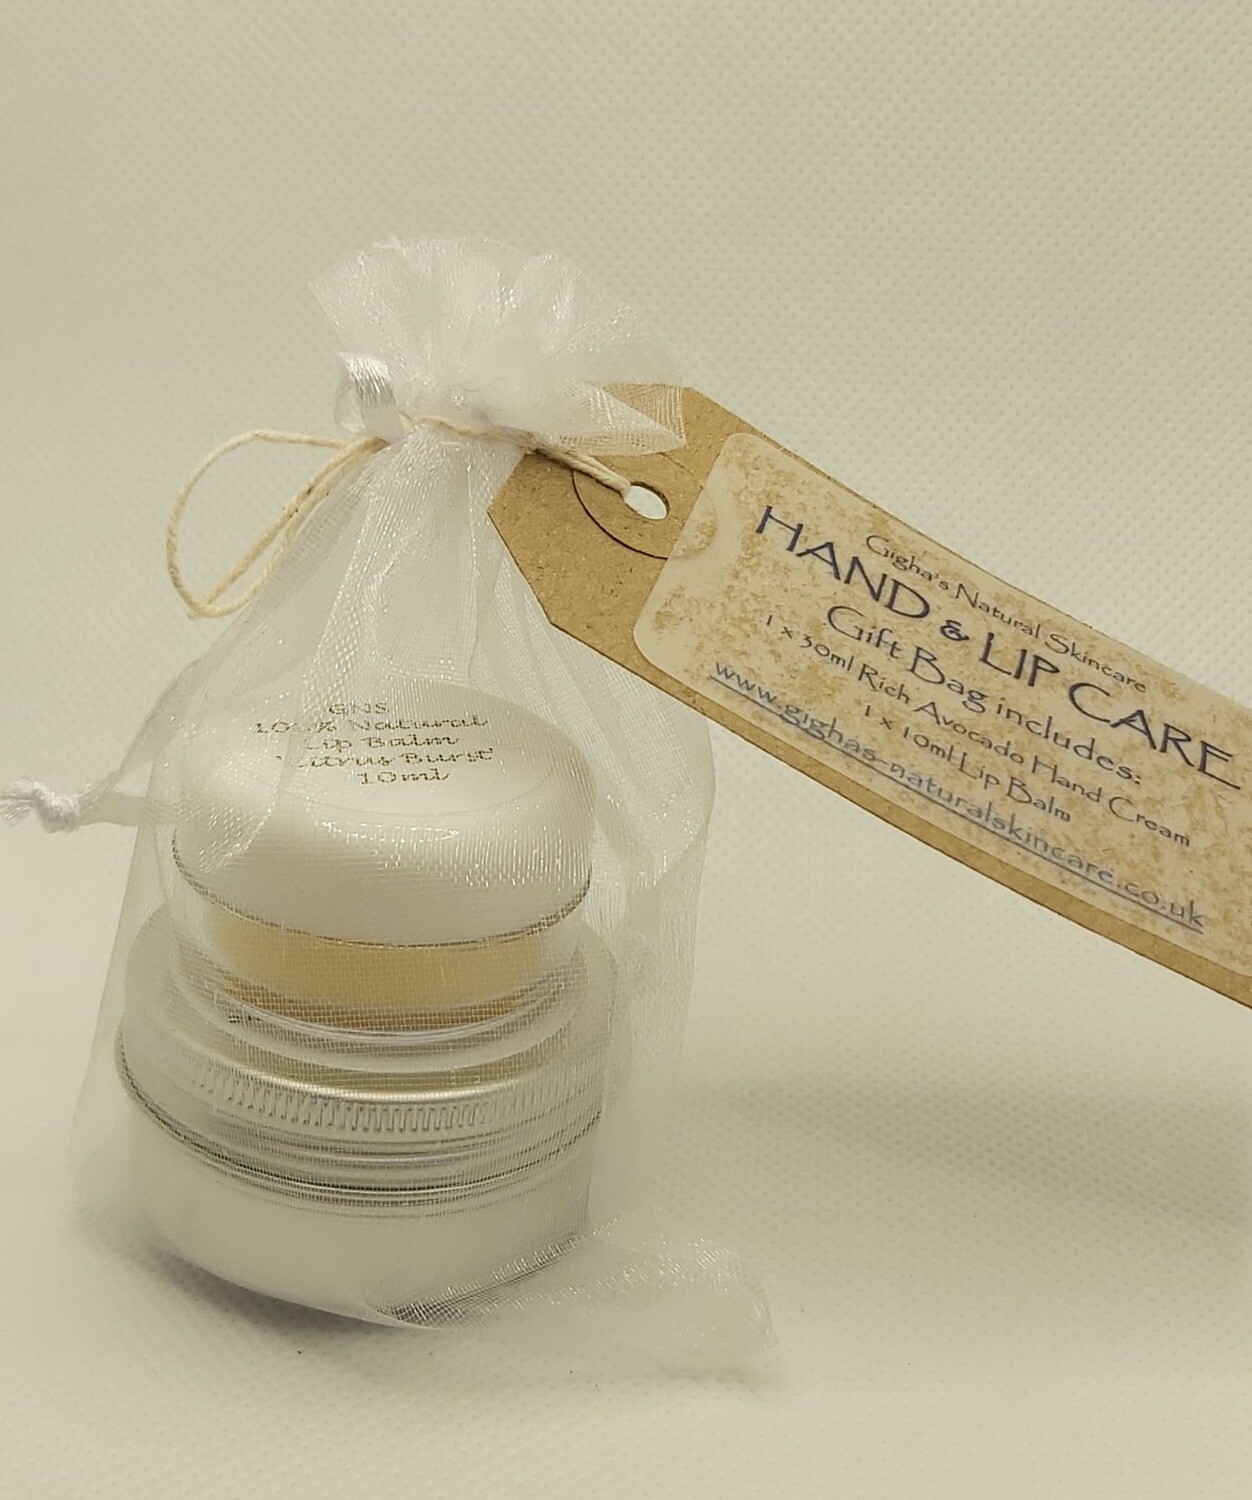 Hand and Lip Care gift bag